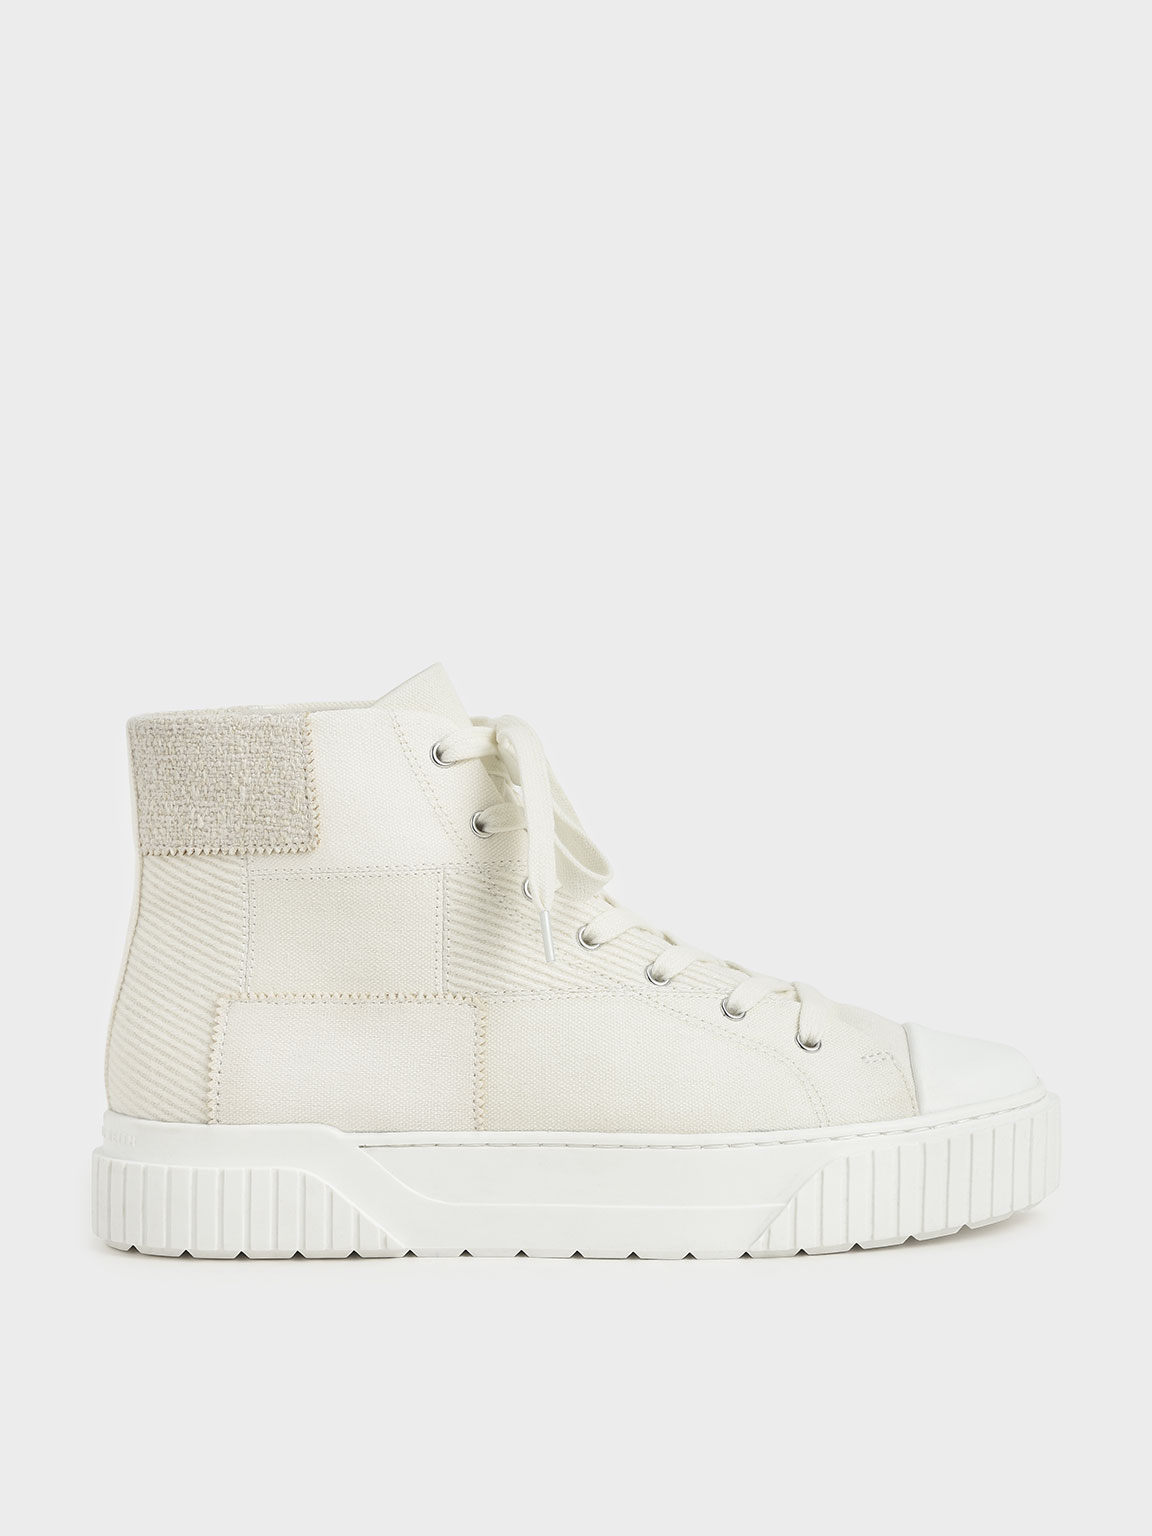 Woven Fabric High Top Sneakers